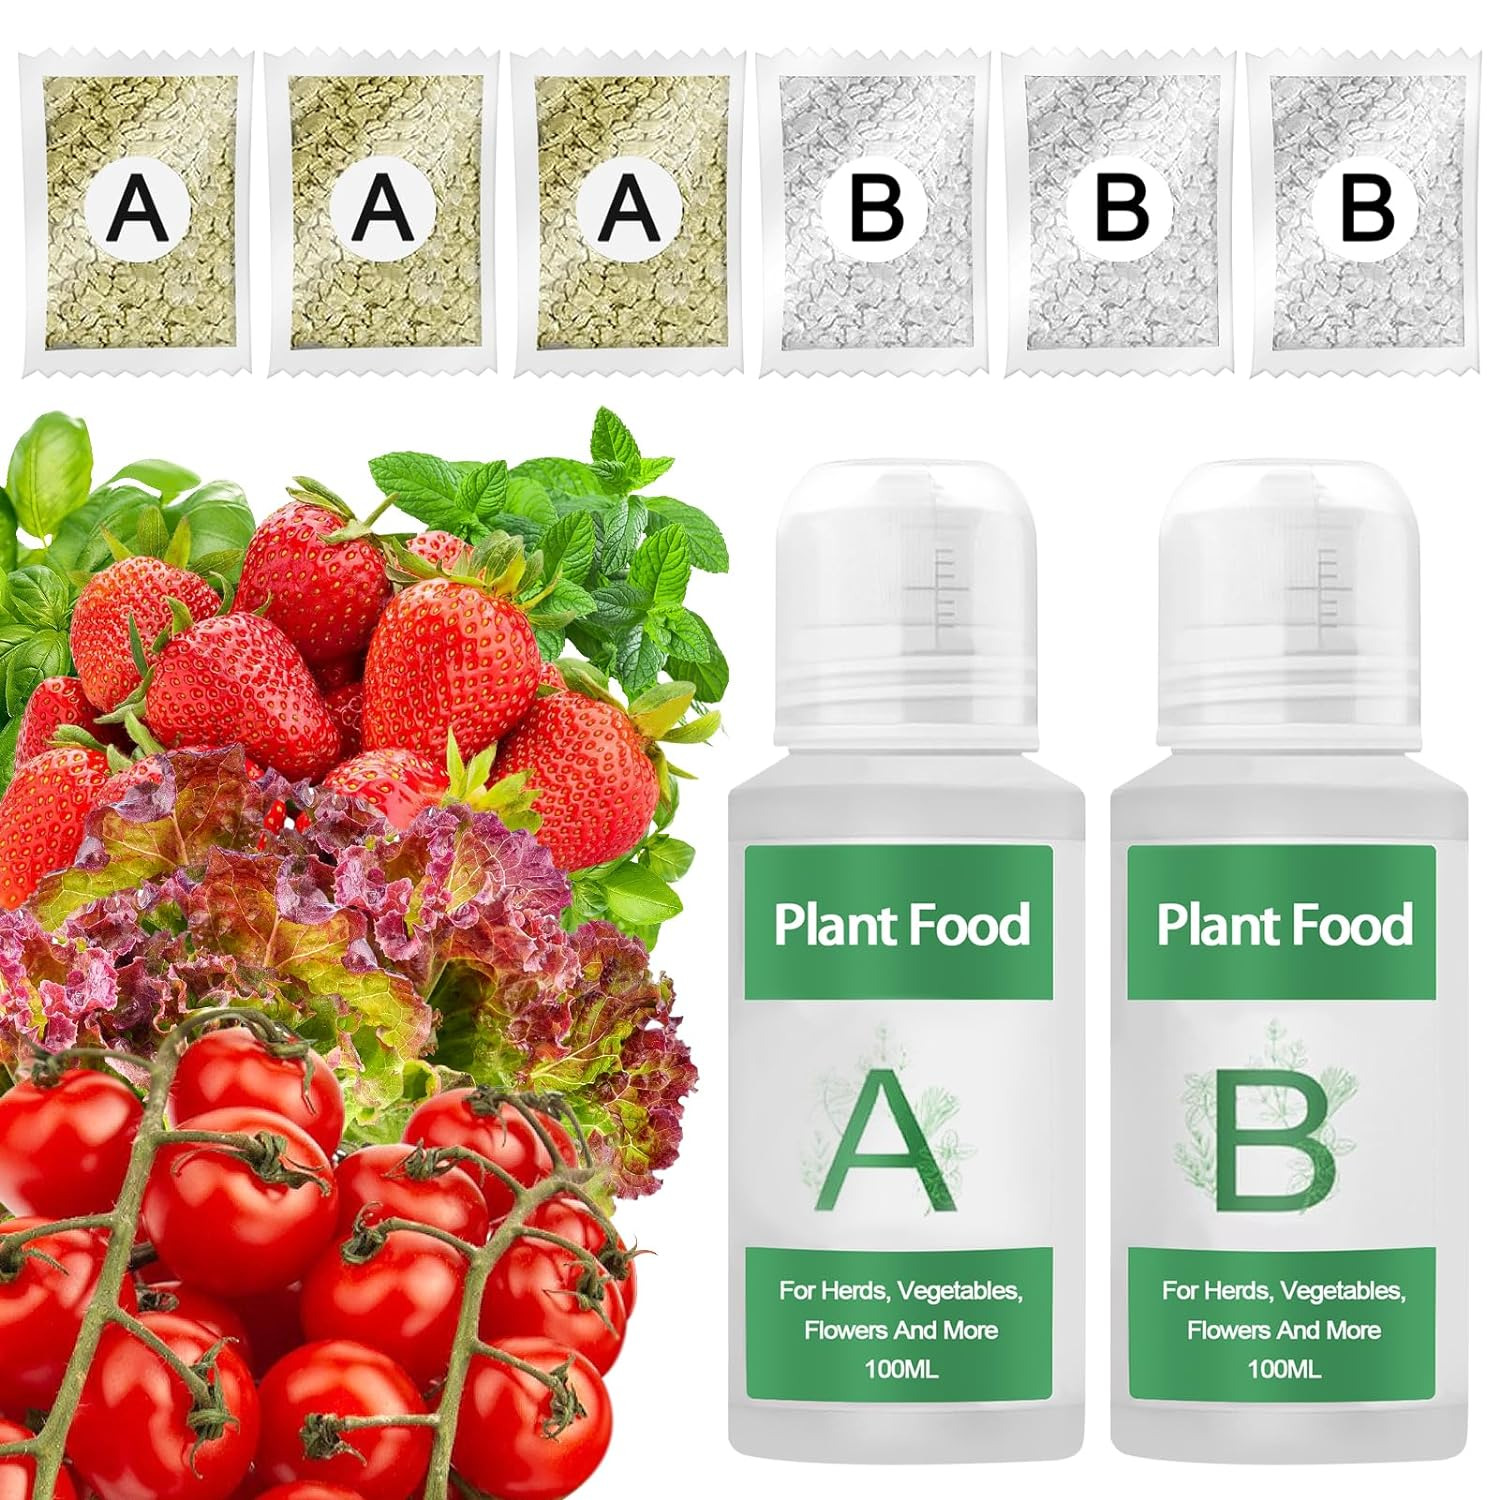 Hydroponic Nutrients (800Ml in Total) - Easy to Use a & B Plant Food for Aero...